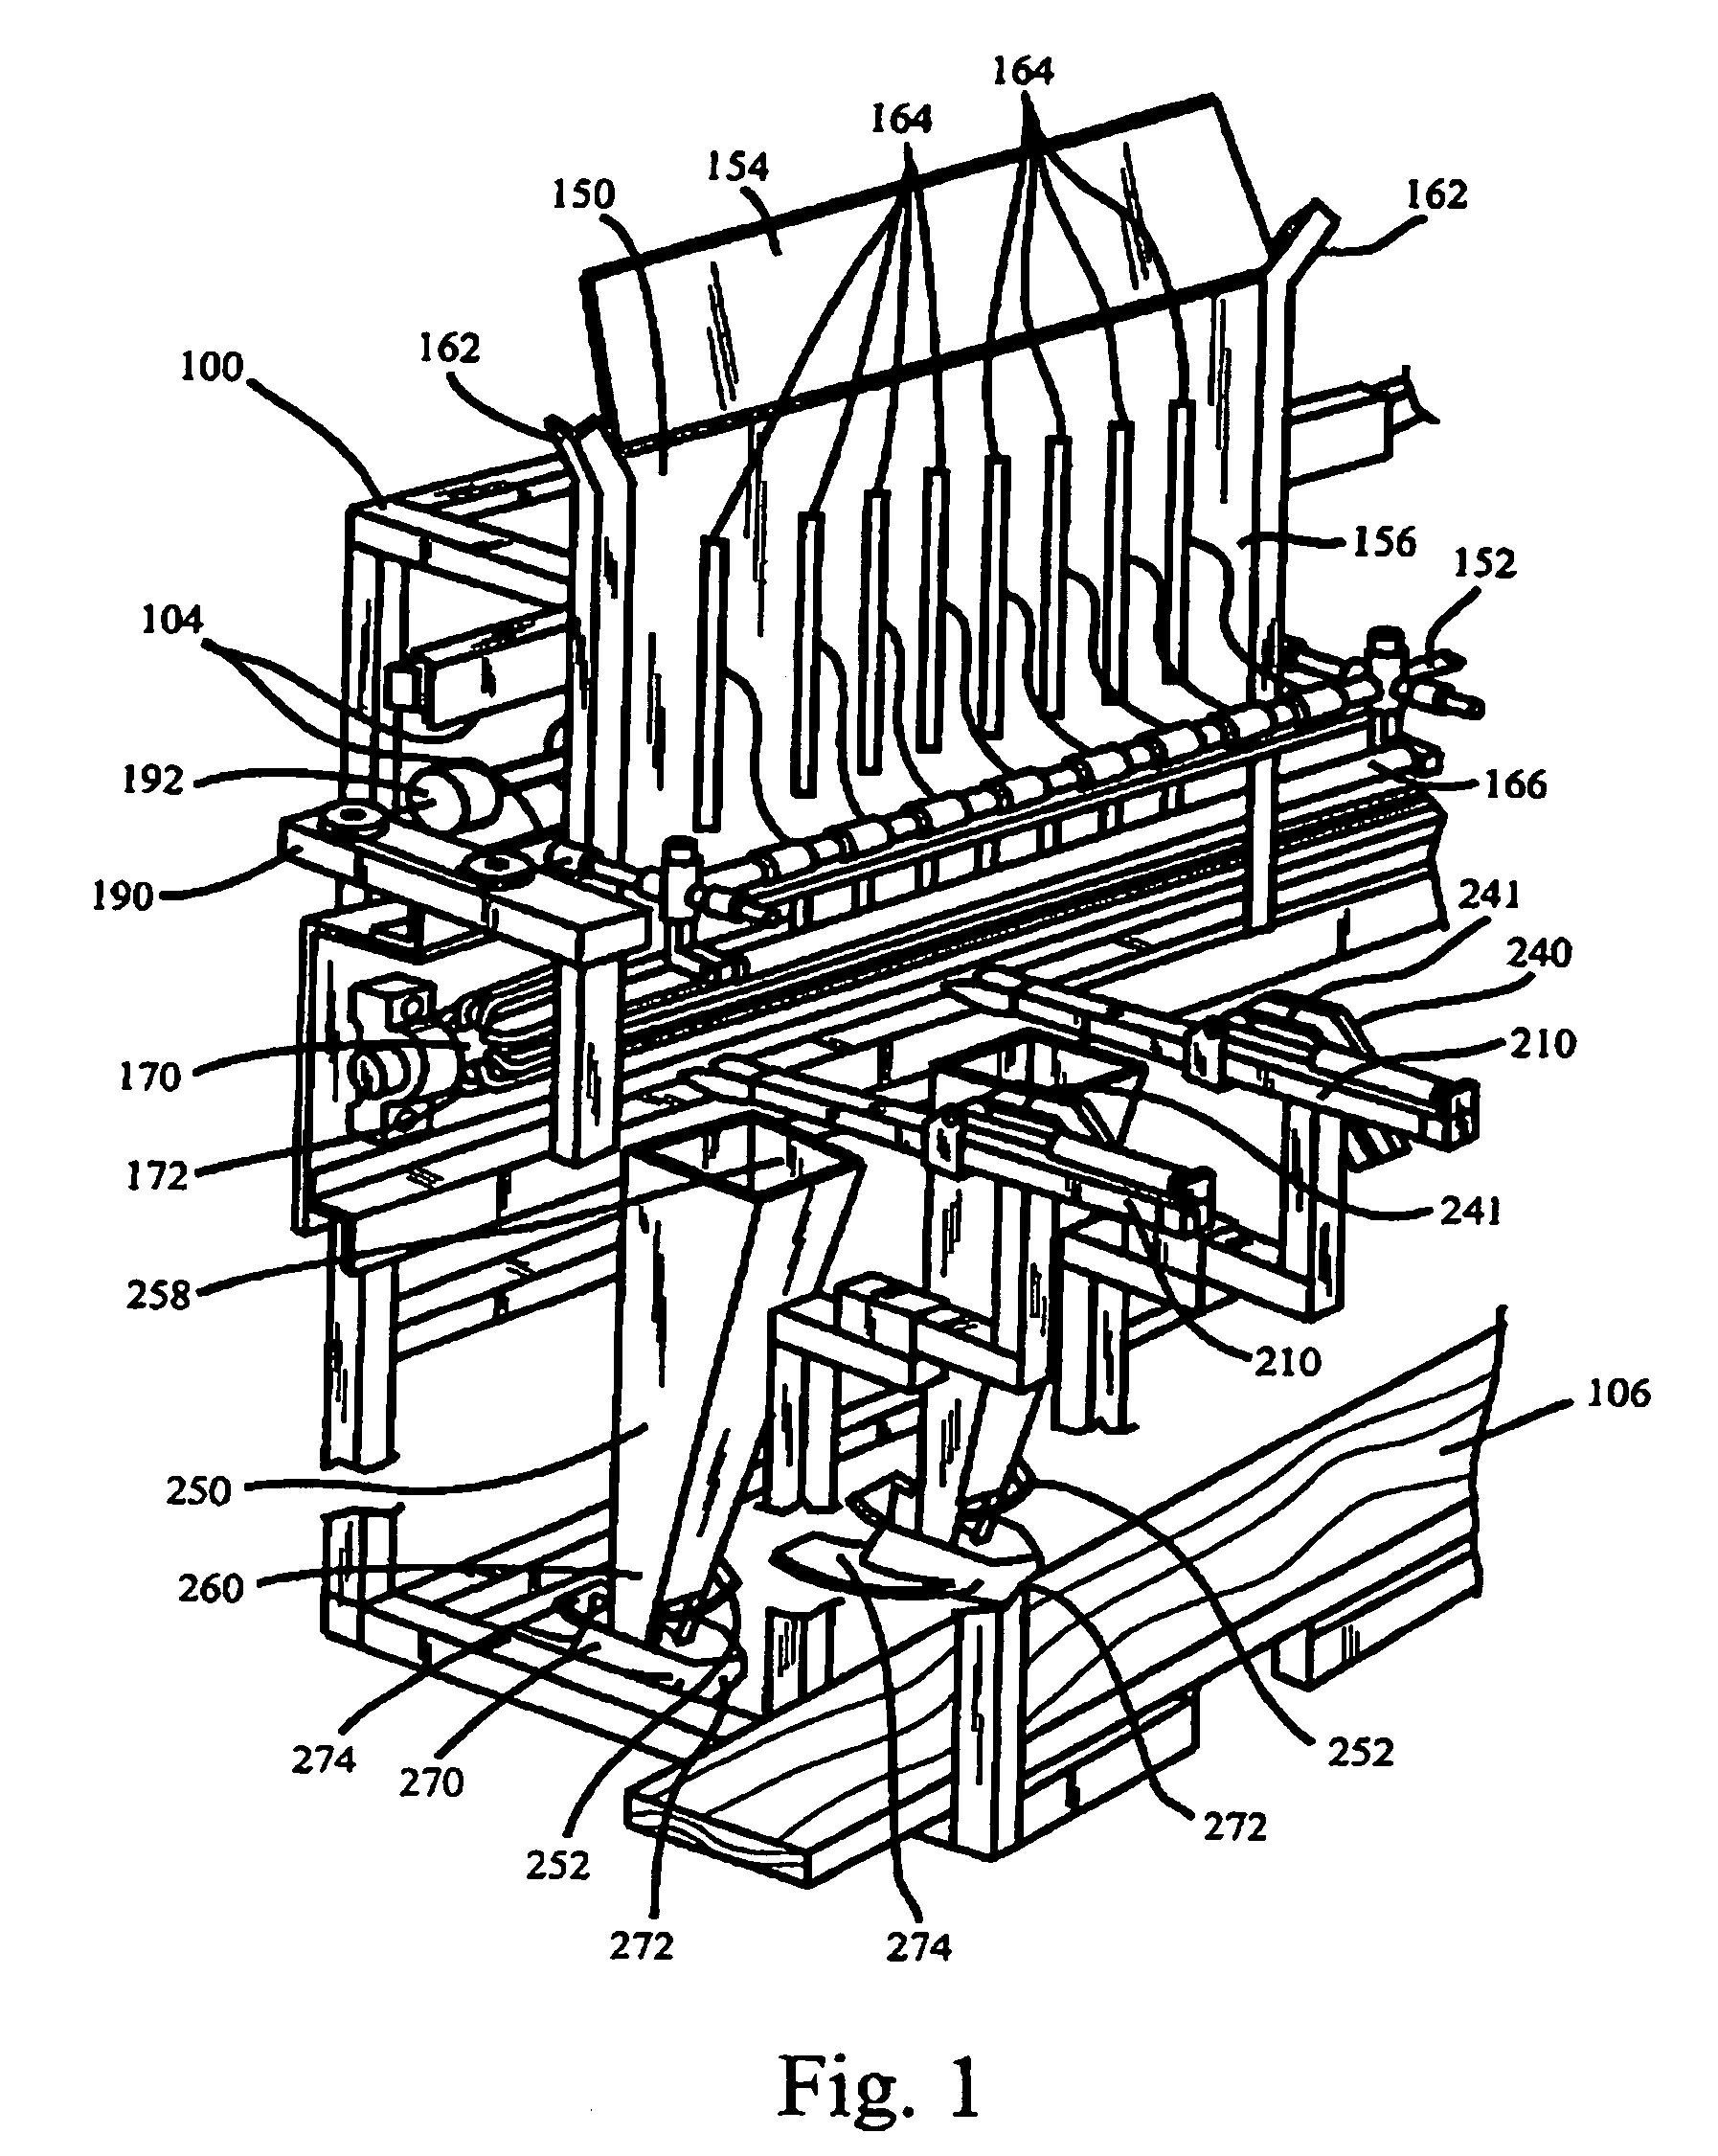 Adjustable tray size automatic seedling planting apparatus